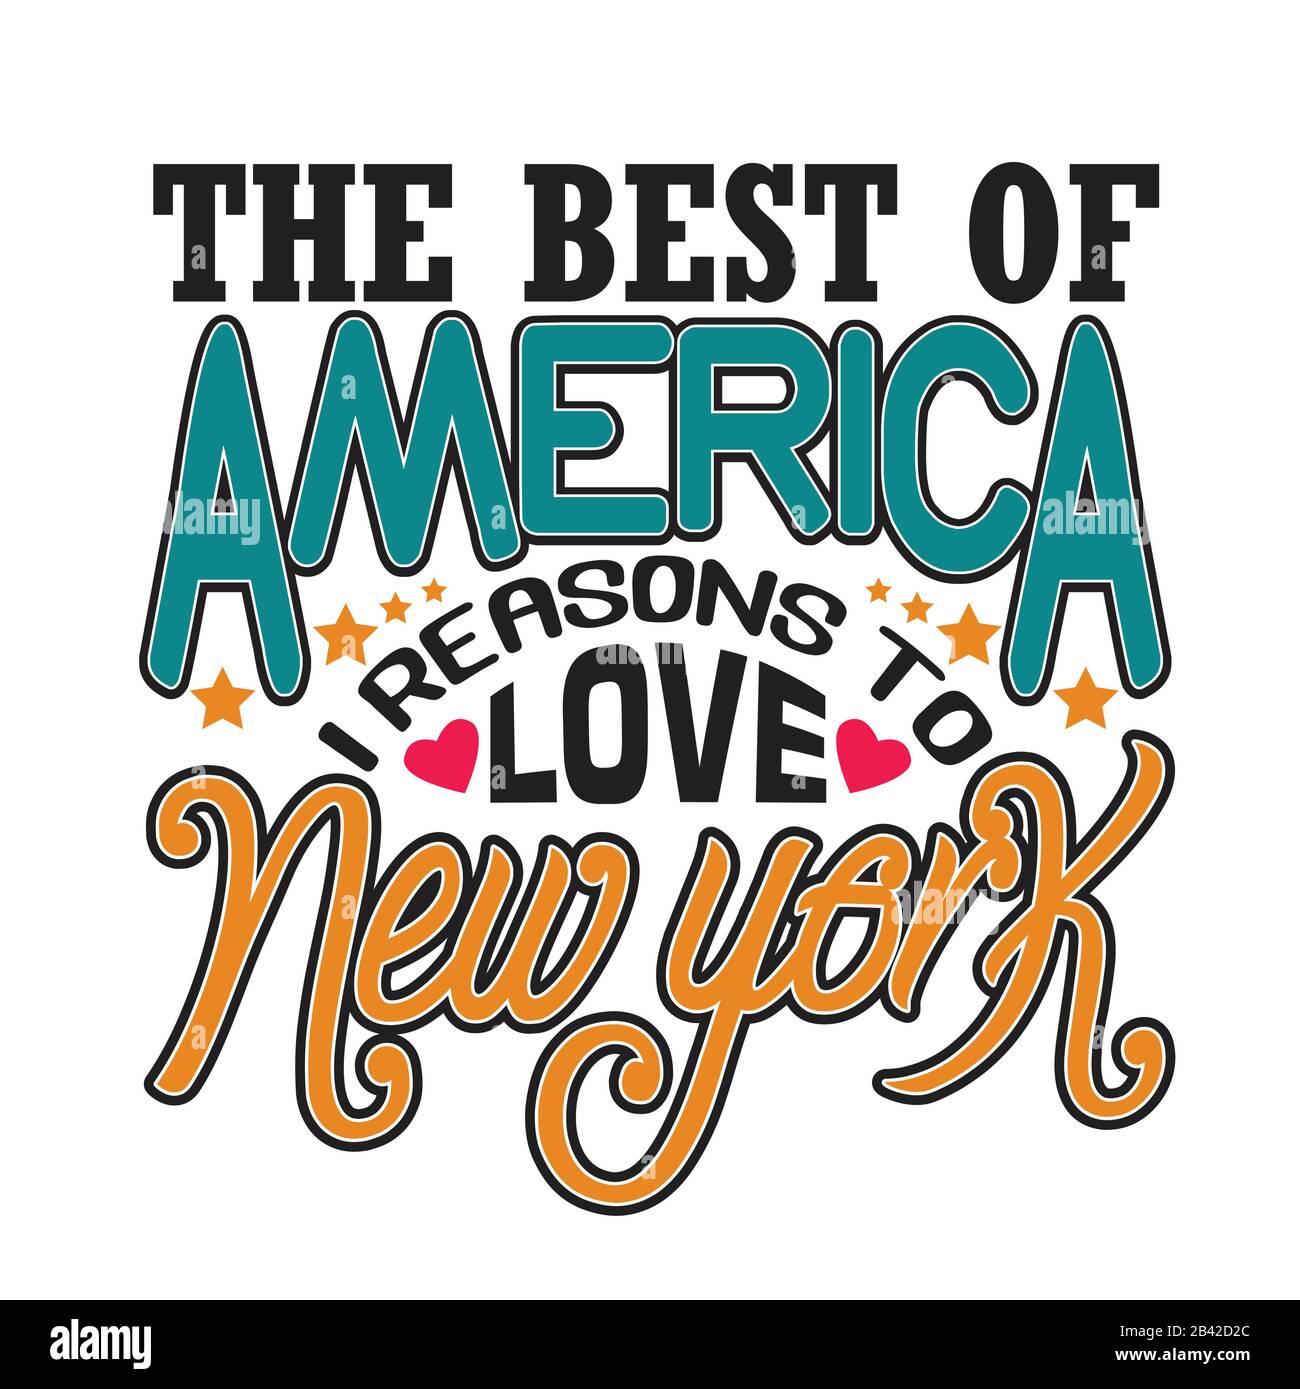 New York Quotes and Slogan good for Tee. The Best Of America I Reasons to Love New York. Stock Vector